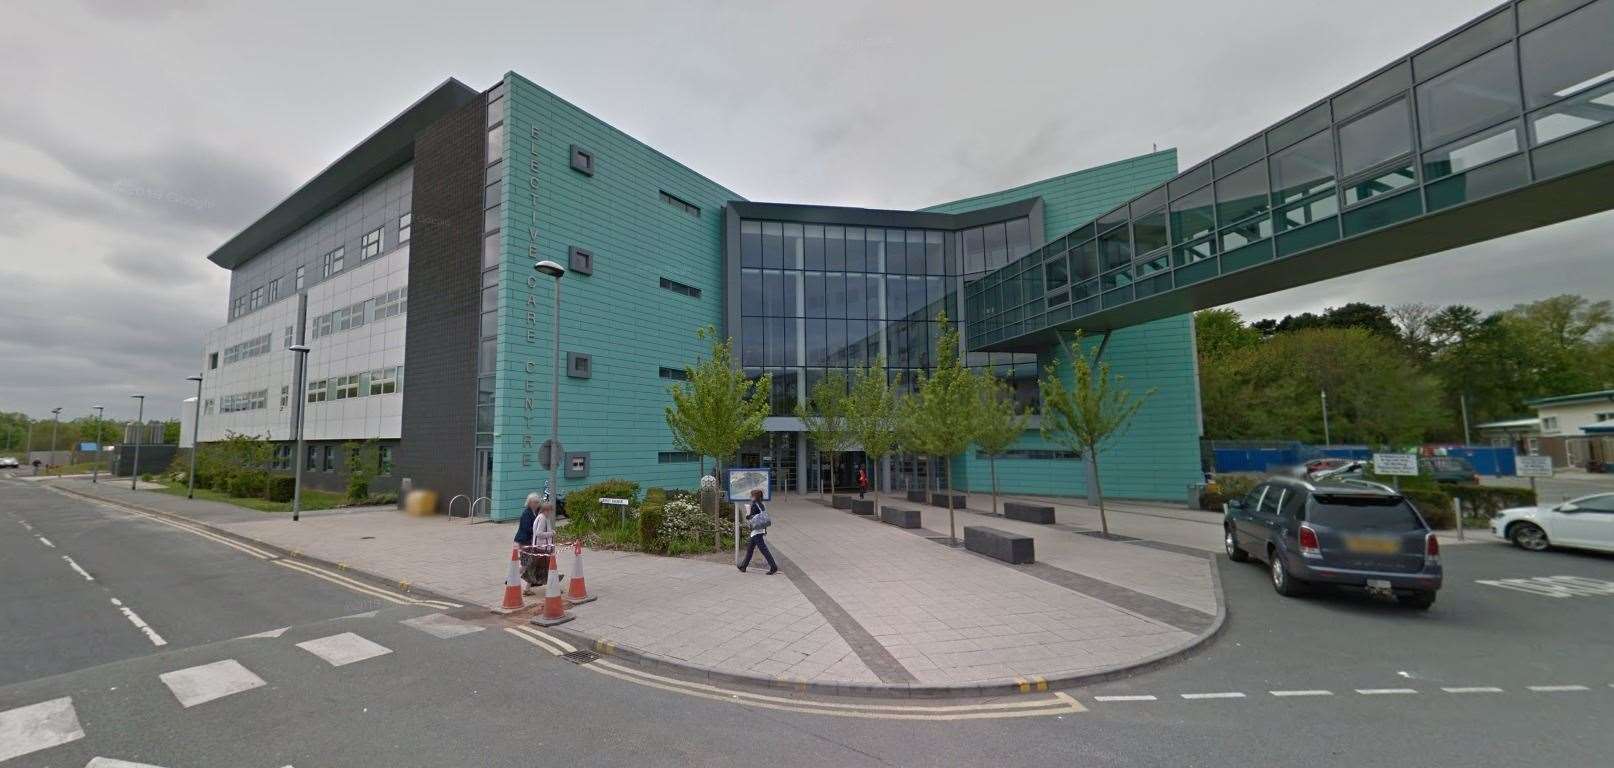 A patient at Aintree University Hospital in Liverpool was among those who died from the recent listeria outbreak. Picture: Google (12085330)